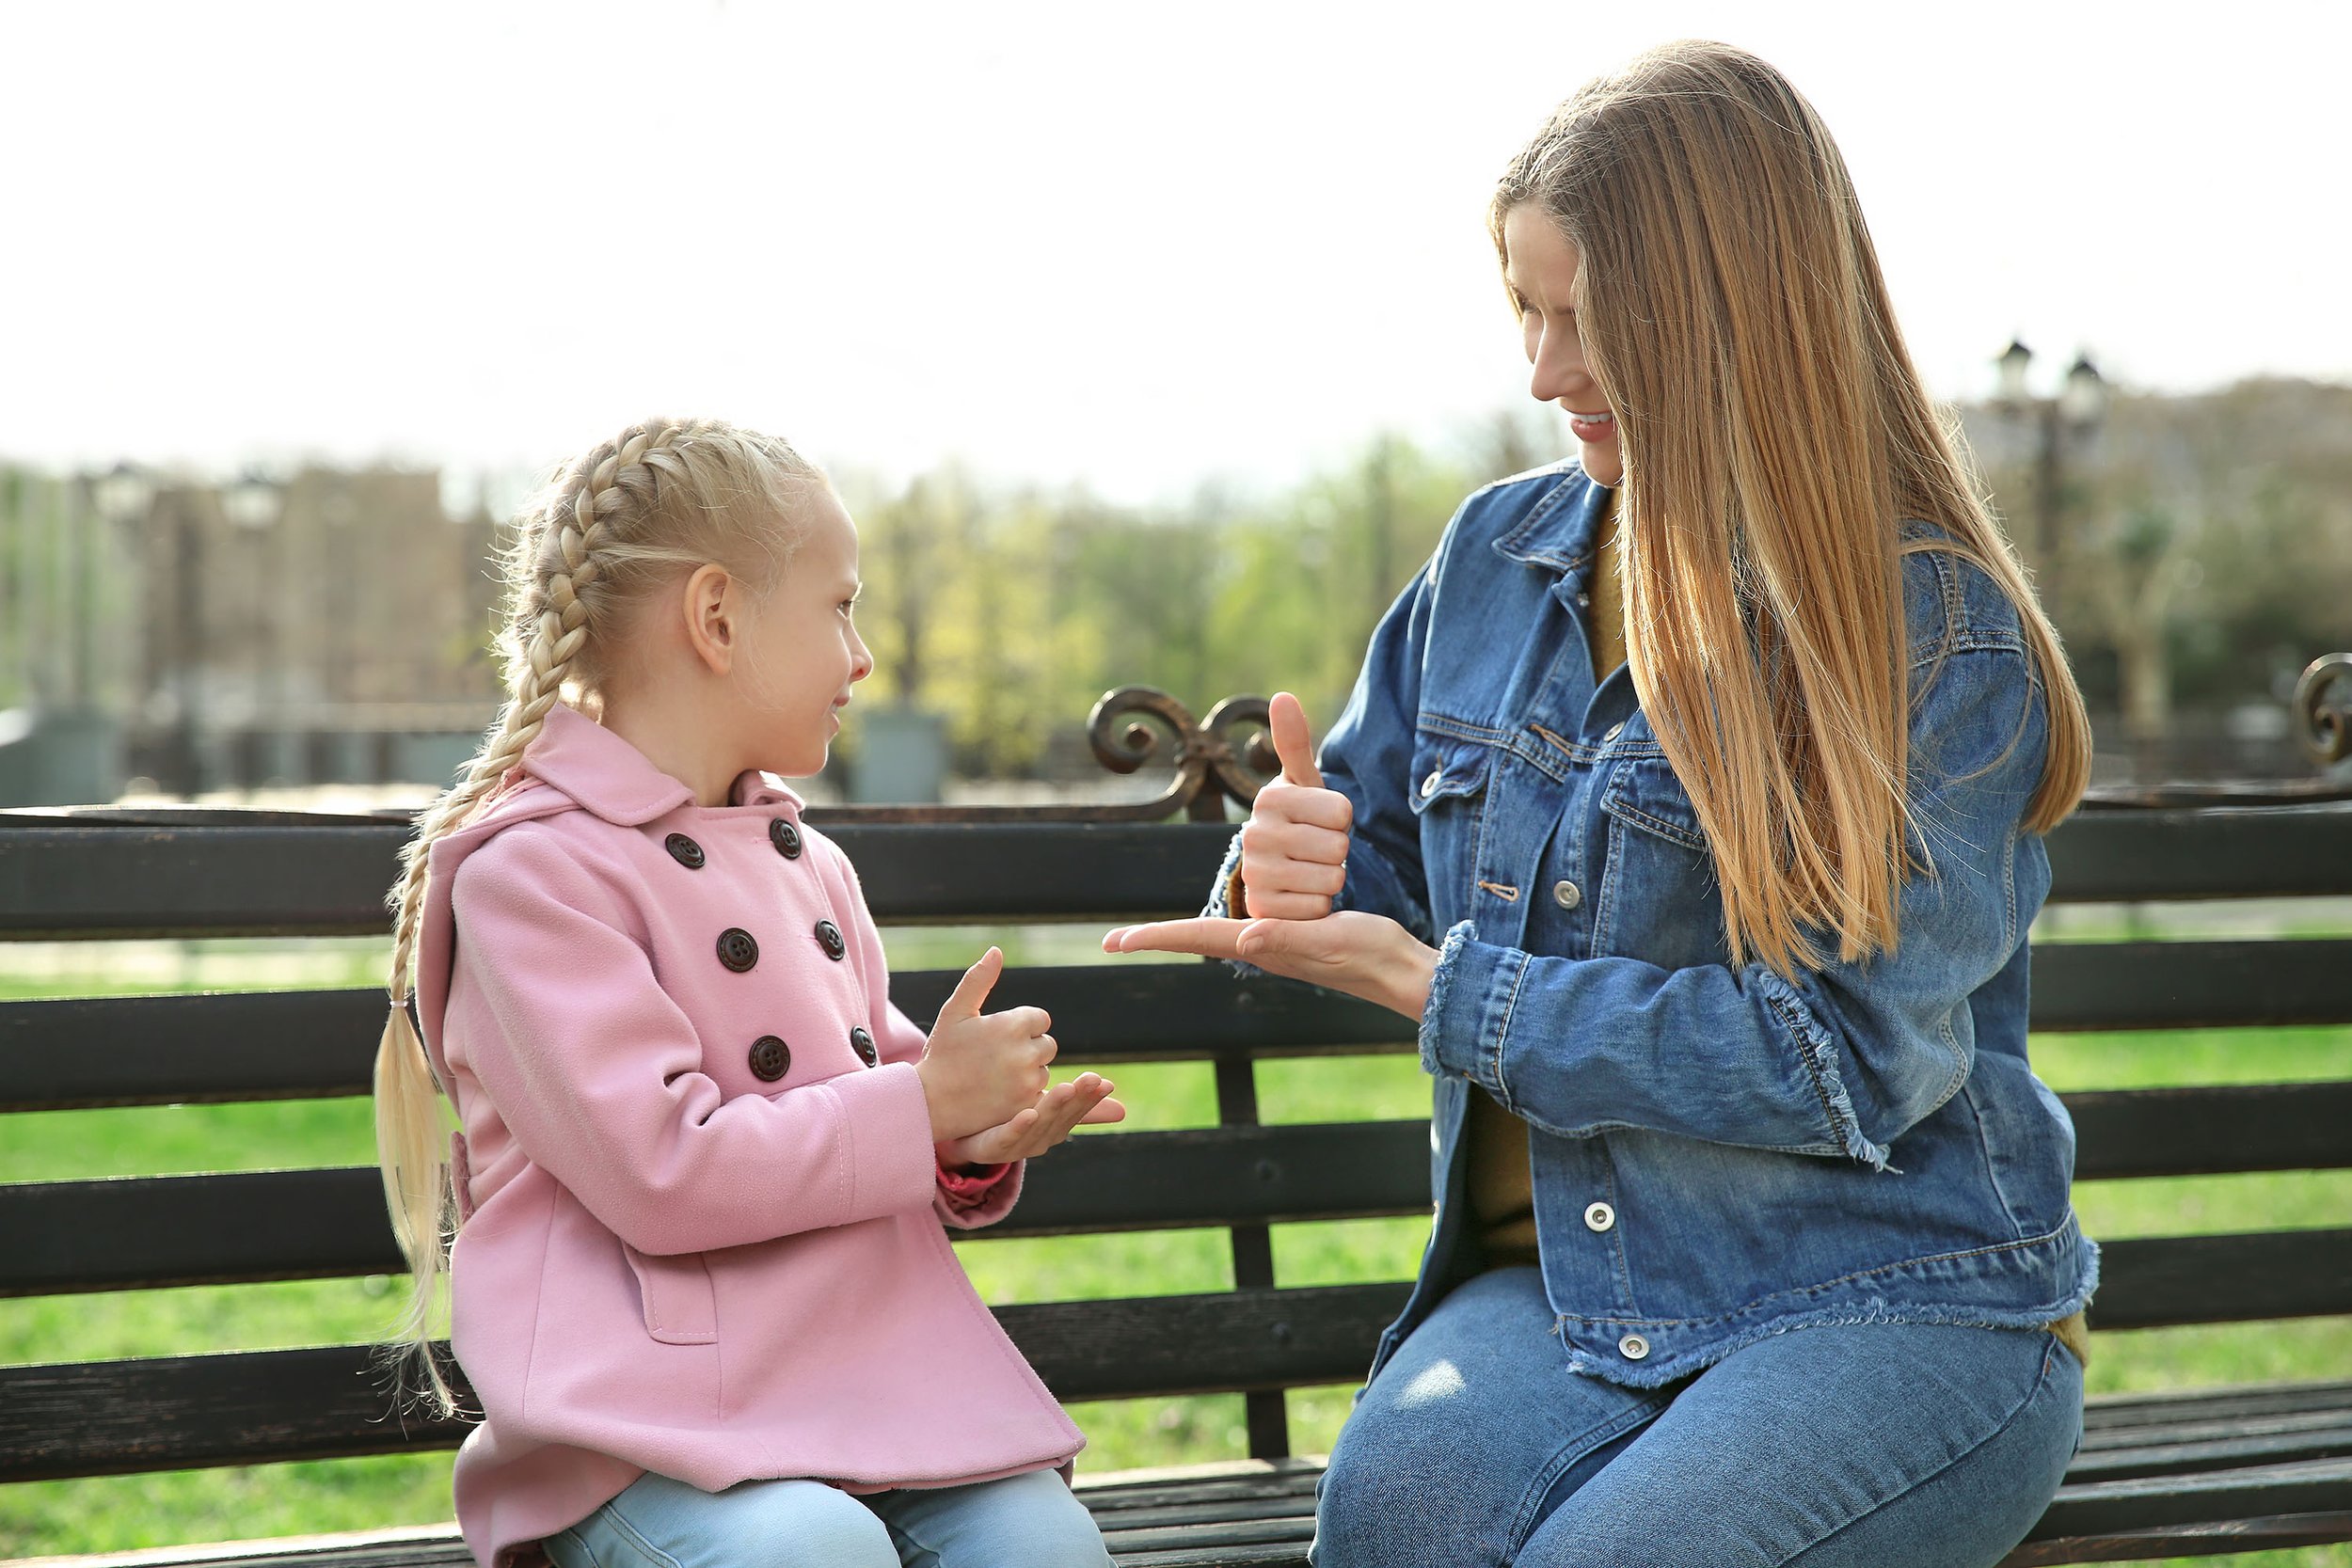 As a Parent Carer, you can help pinpoint problems frequently experienced by families with SEND children